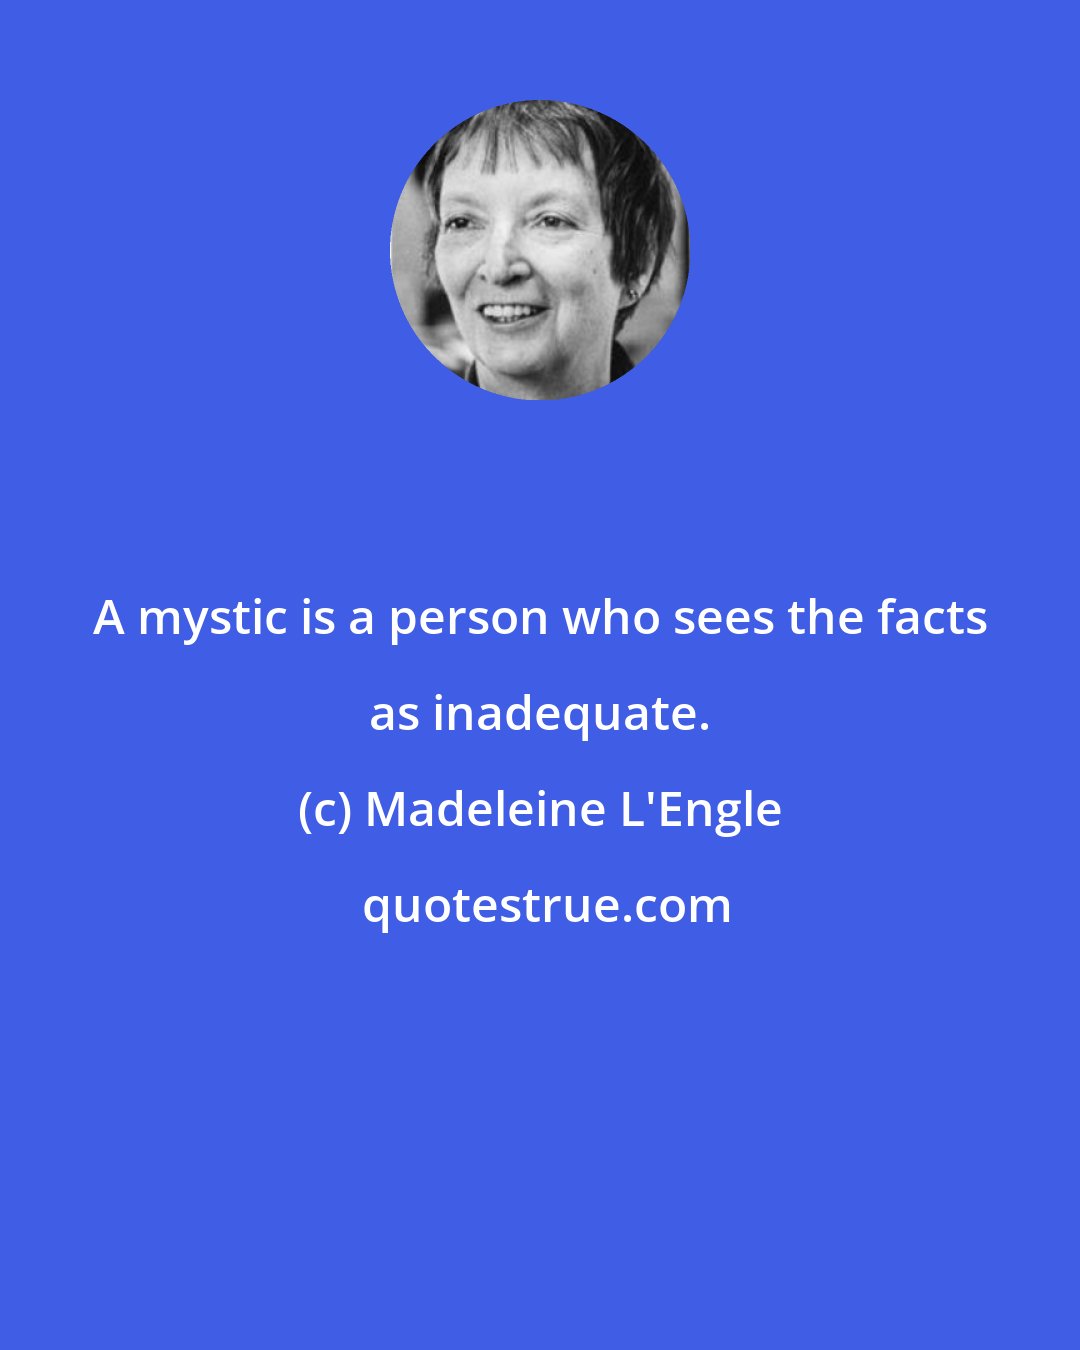 Madeleine L'Engle: A mystic is a person who sees the facts as inadequate.